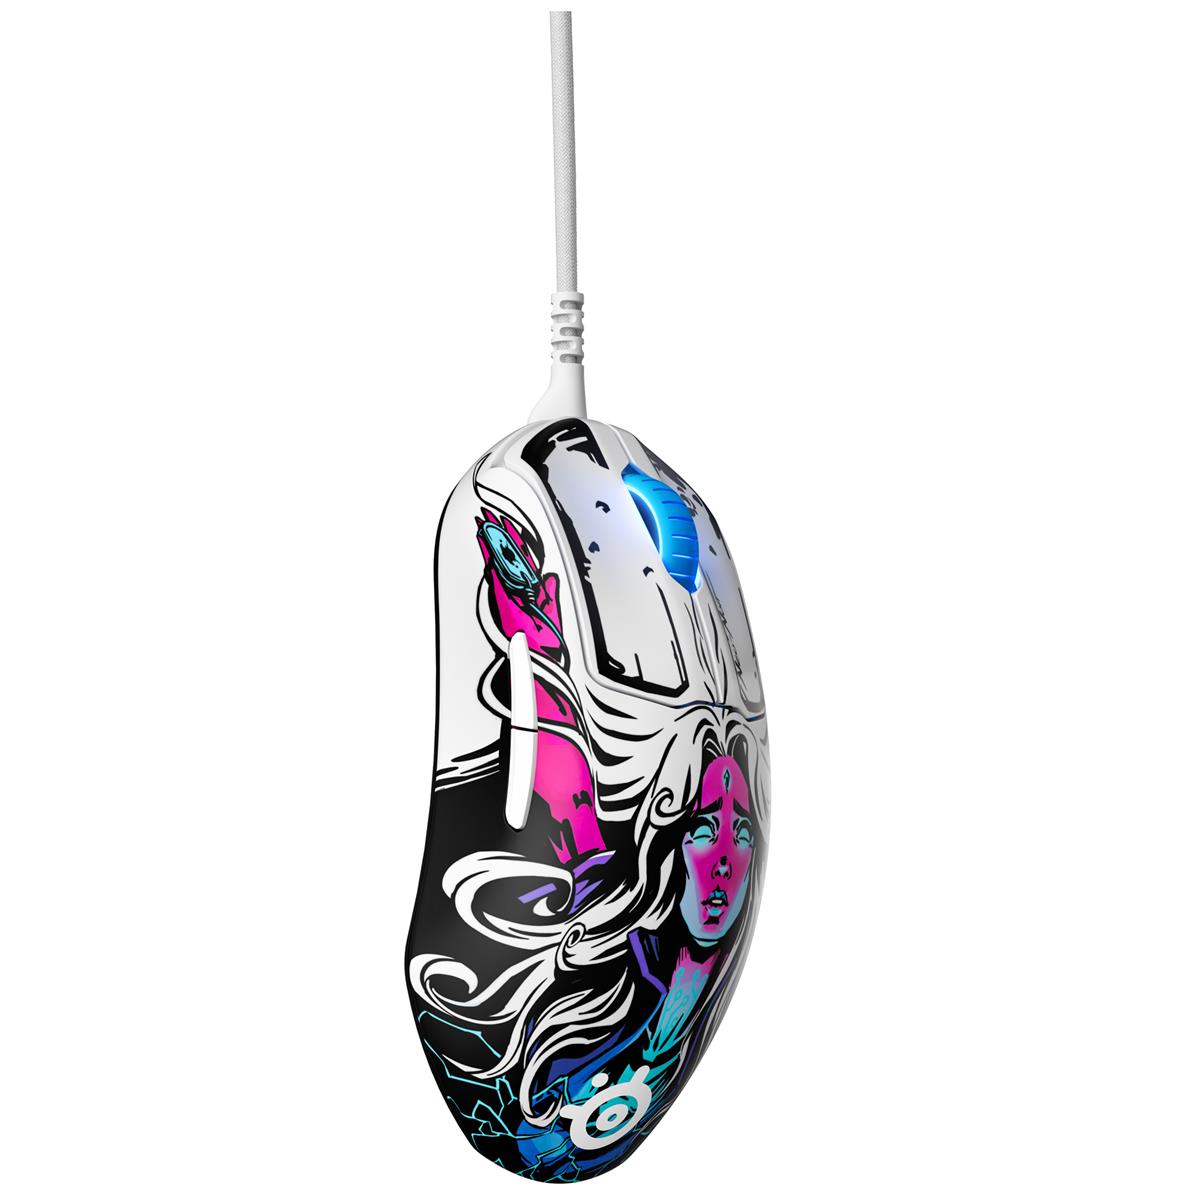 Image of SteelSeries Prime Neo Noir Limited Edition Wired Gaming Mouse